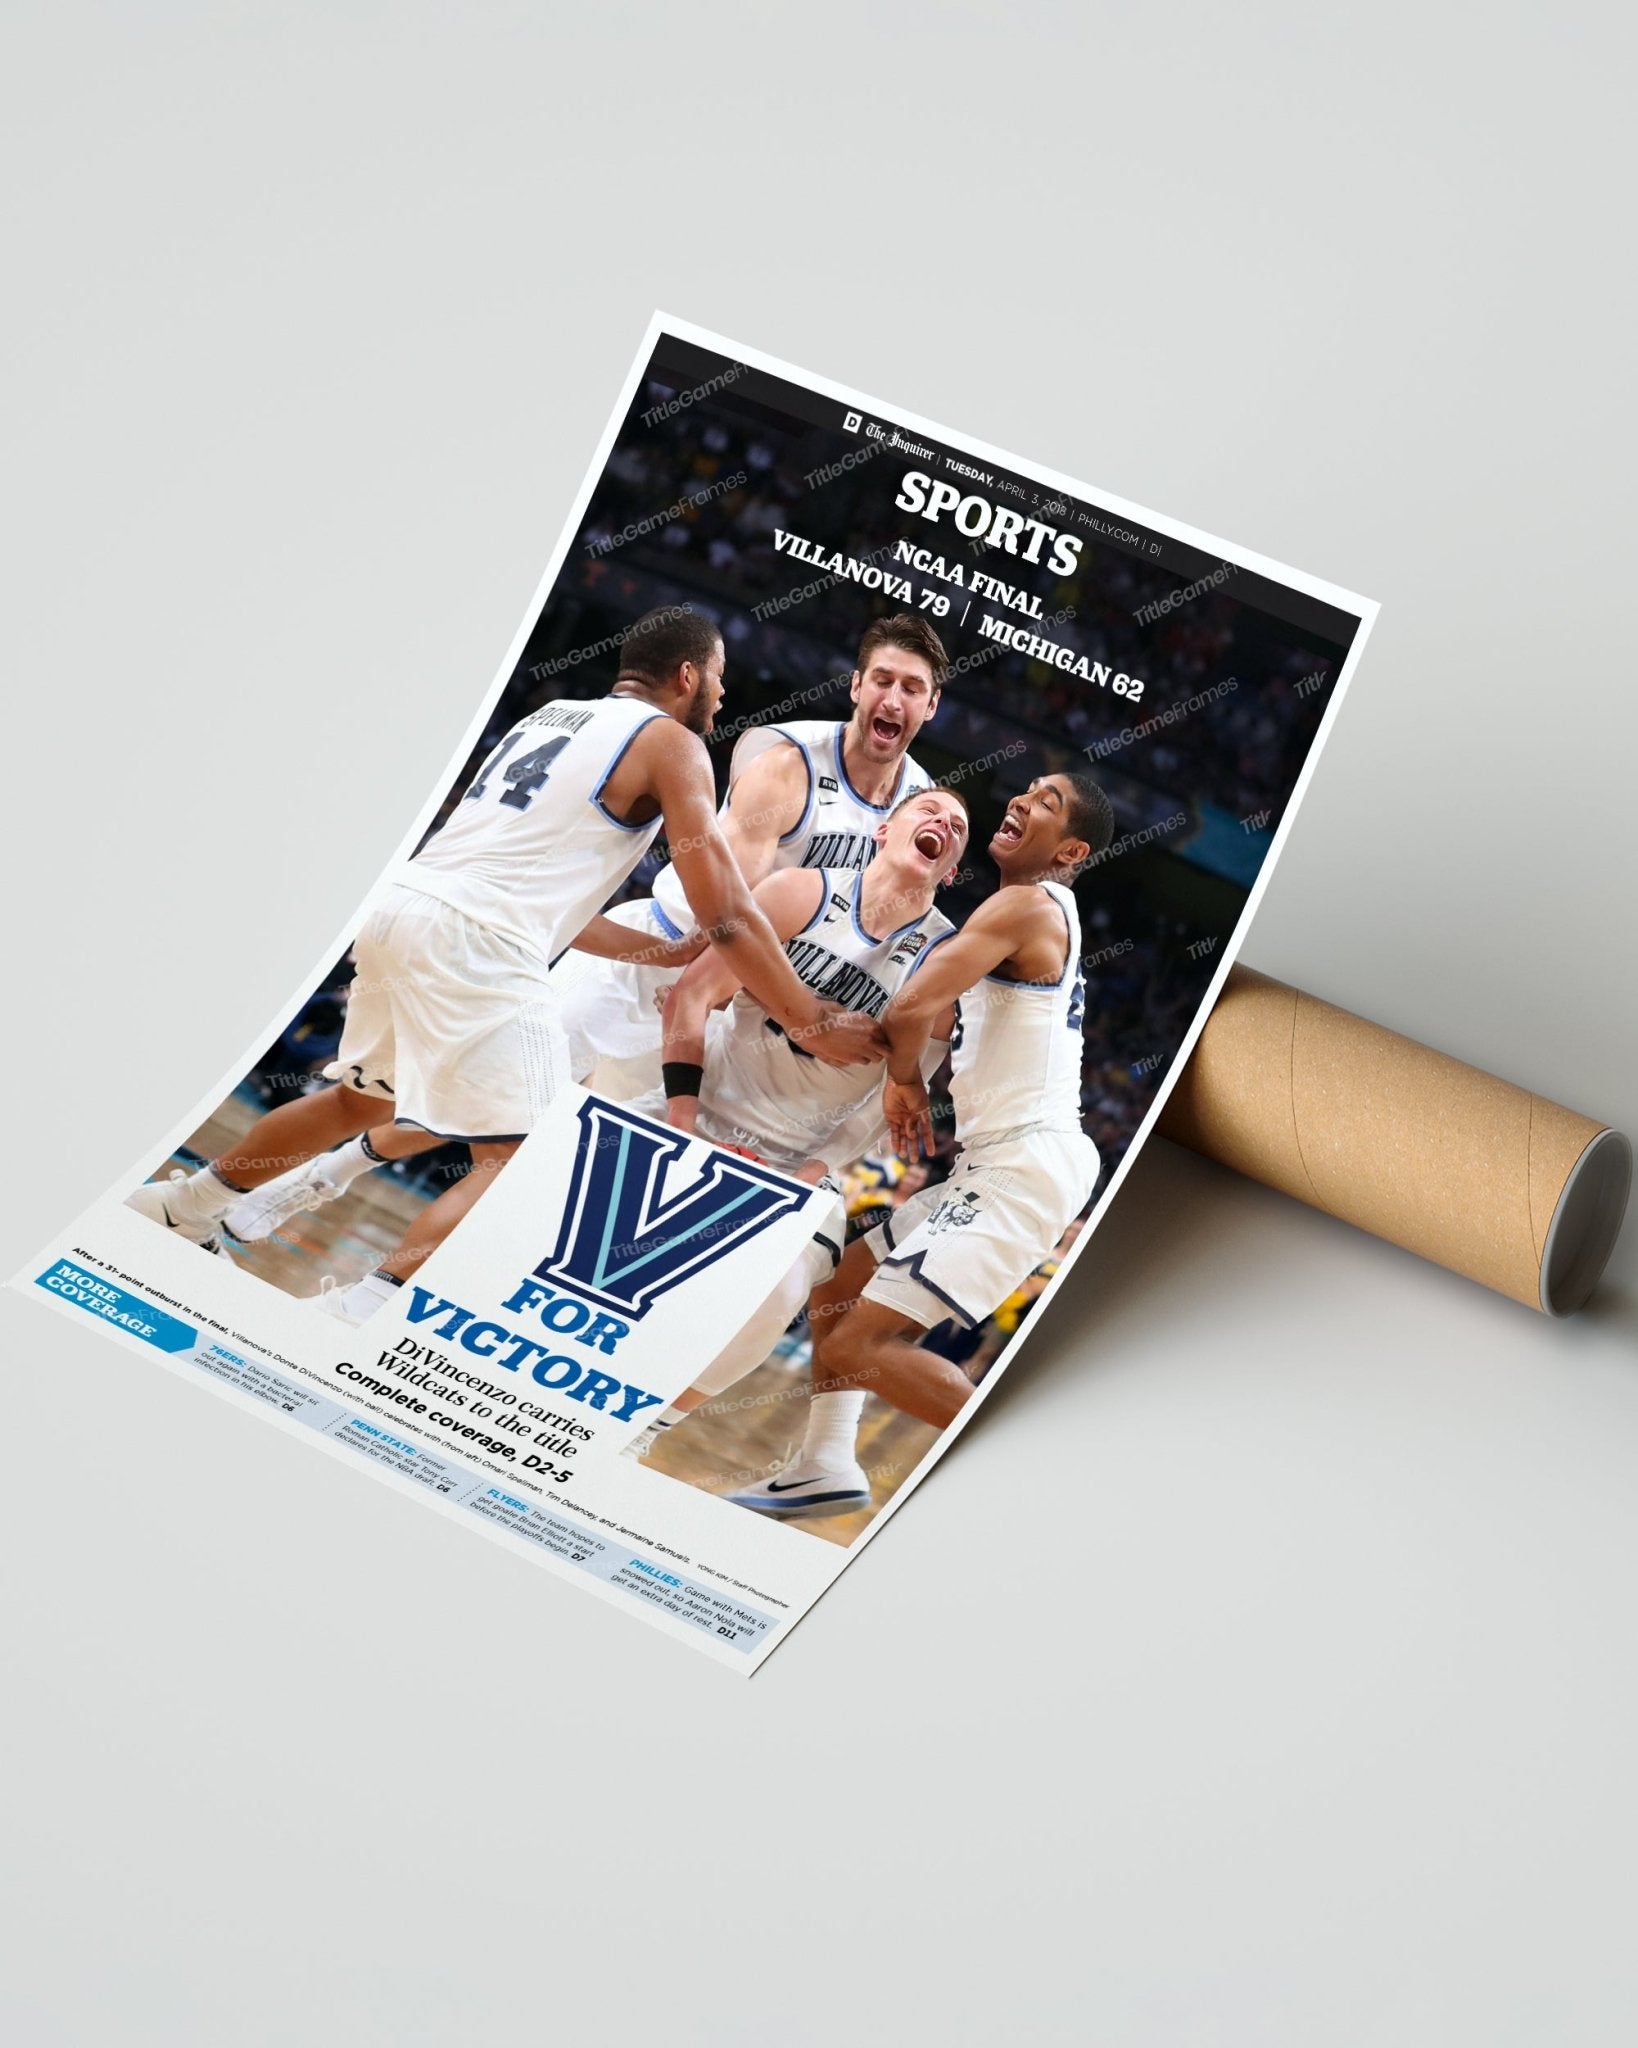 2018 Villanova Wildcats NCAA College Basketball Champions Framed Front Page Newspaper Print - Title Game Frames